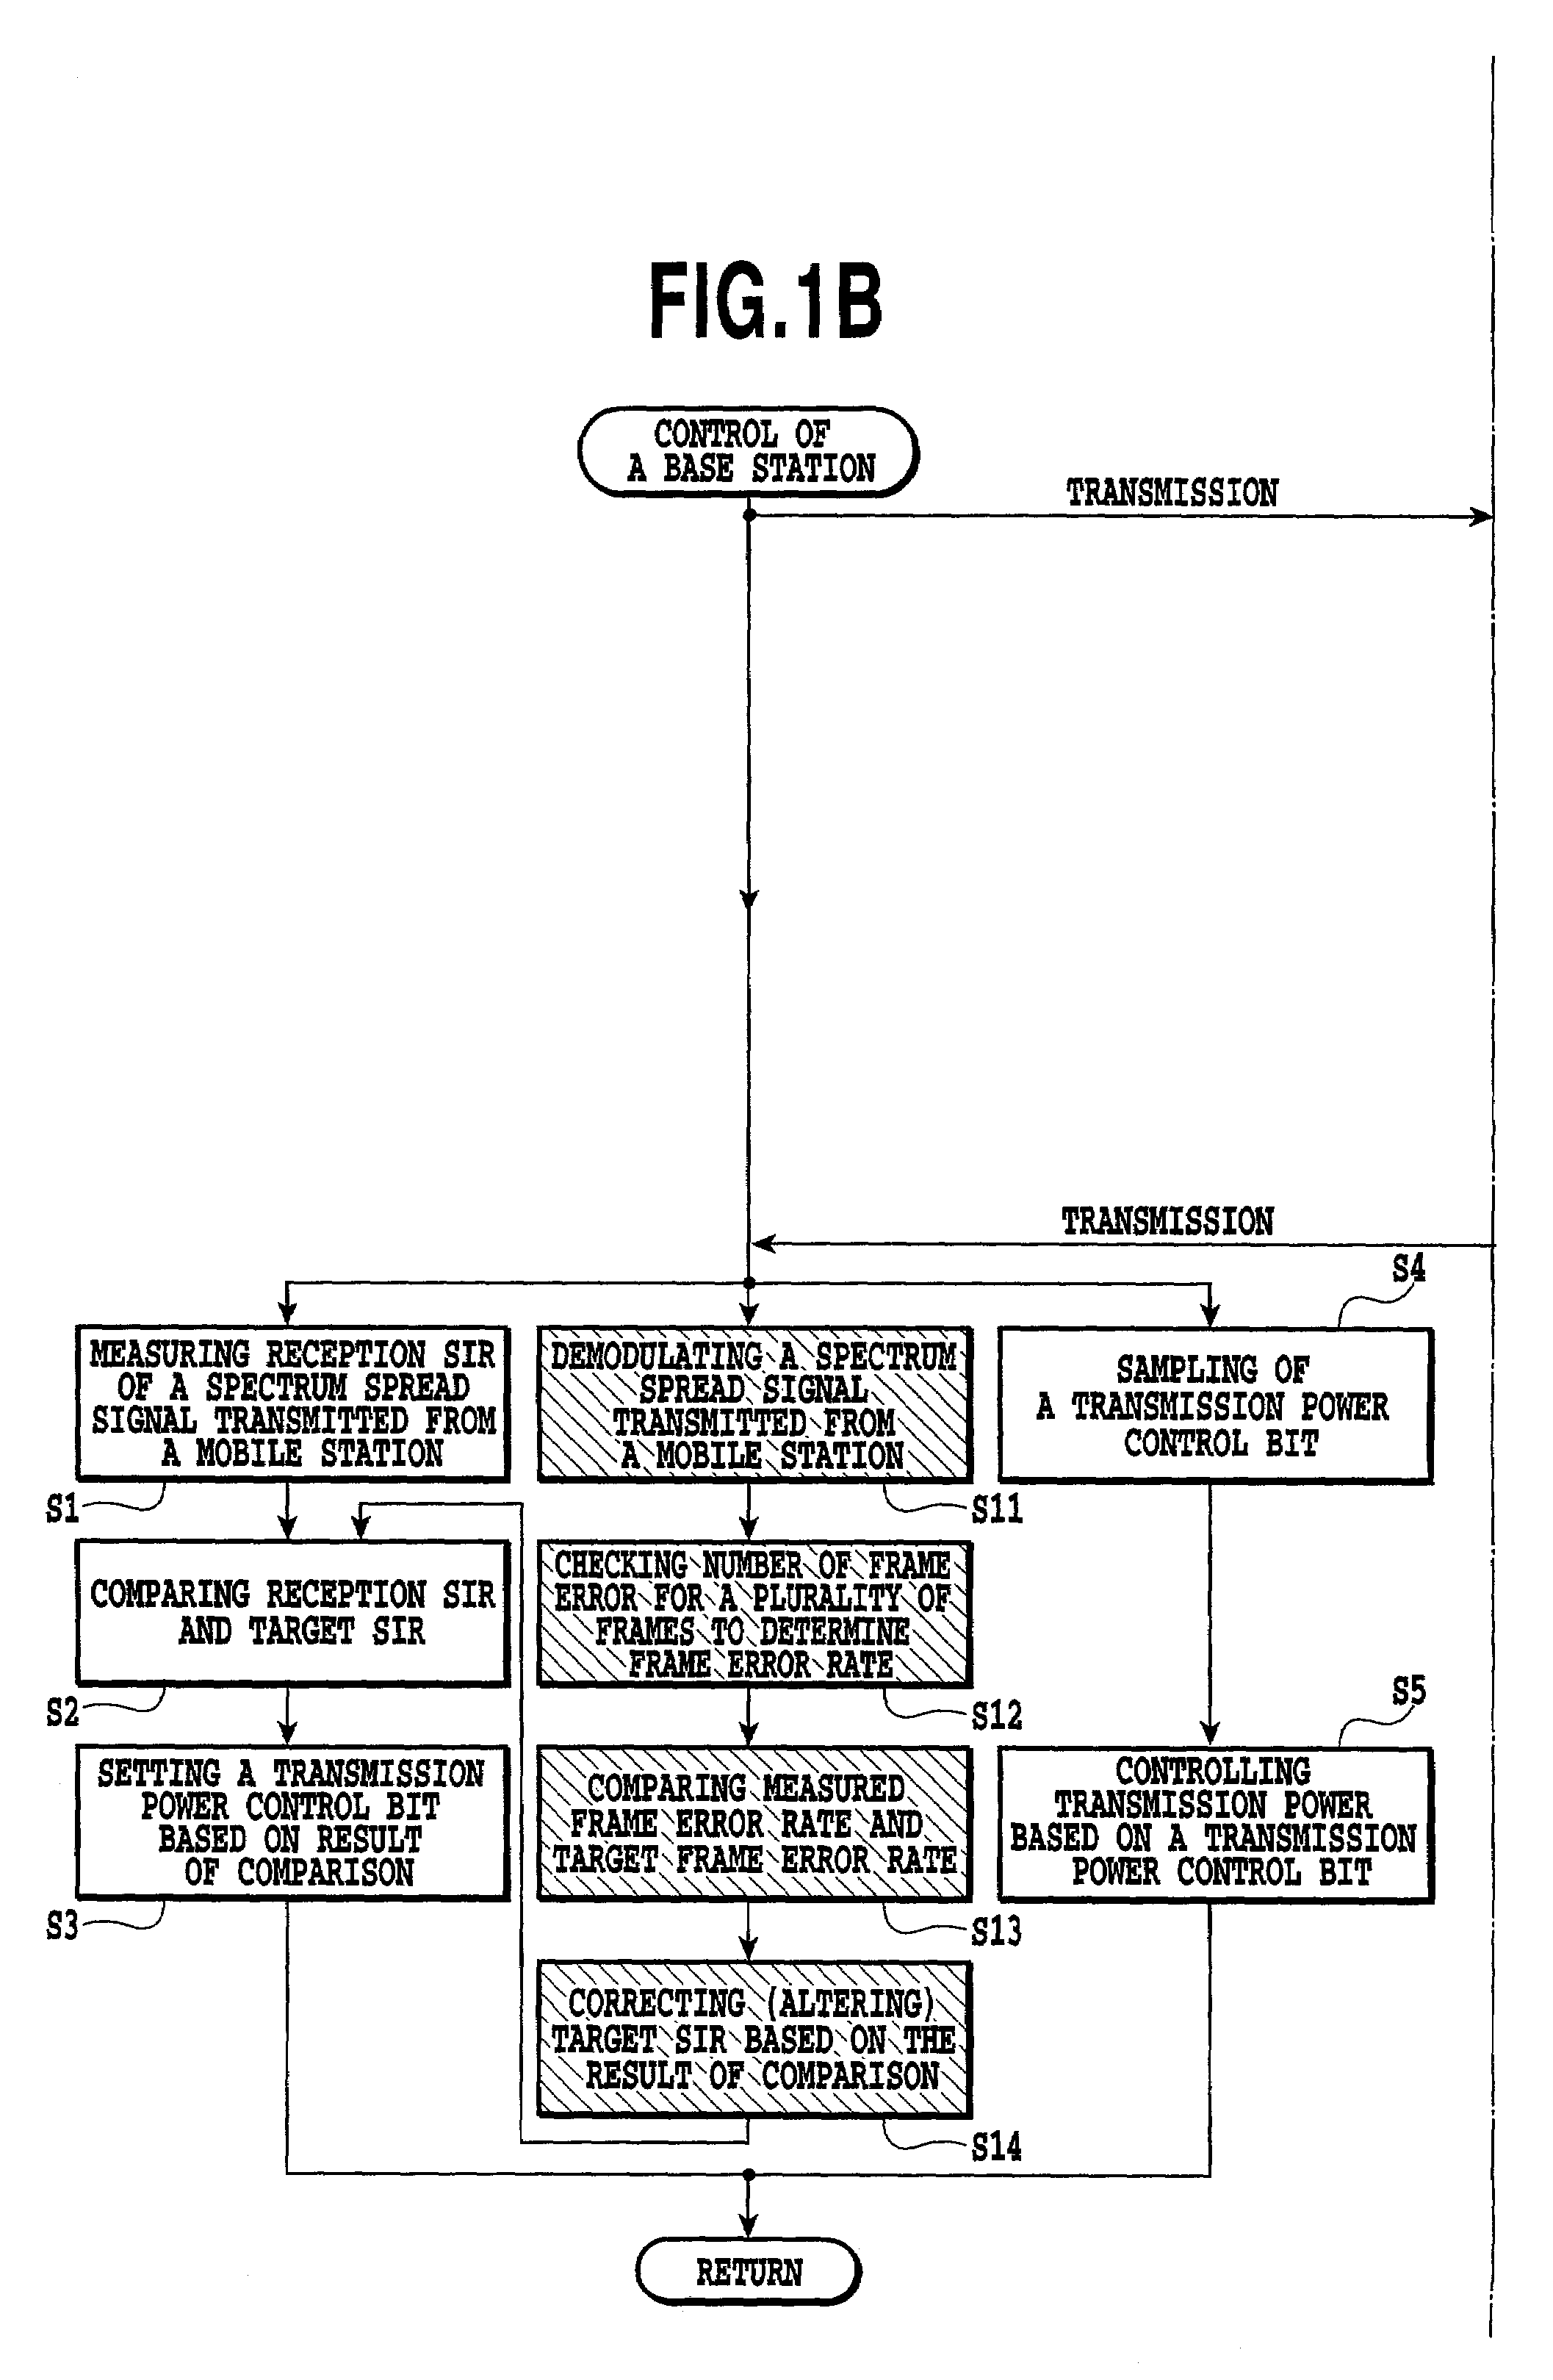 Transmission power control method and mobile communication system